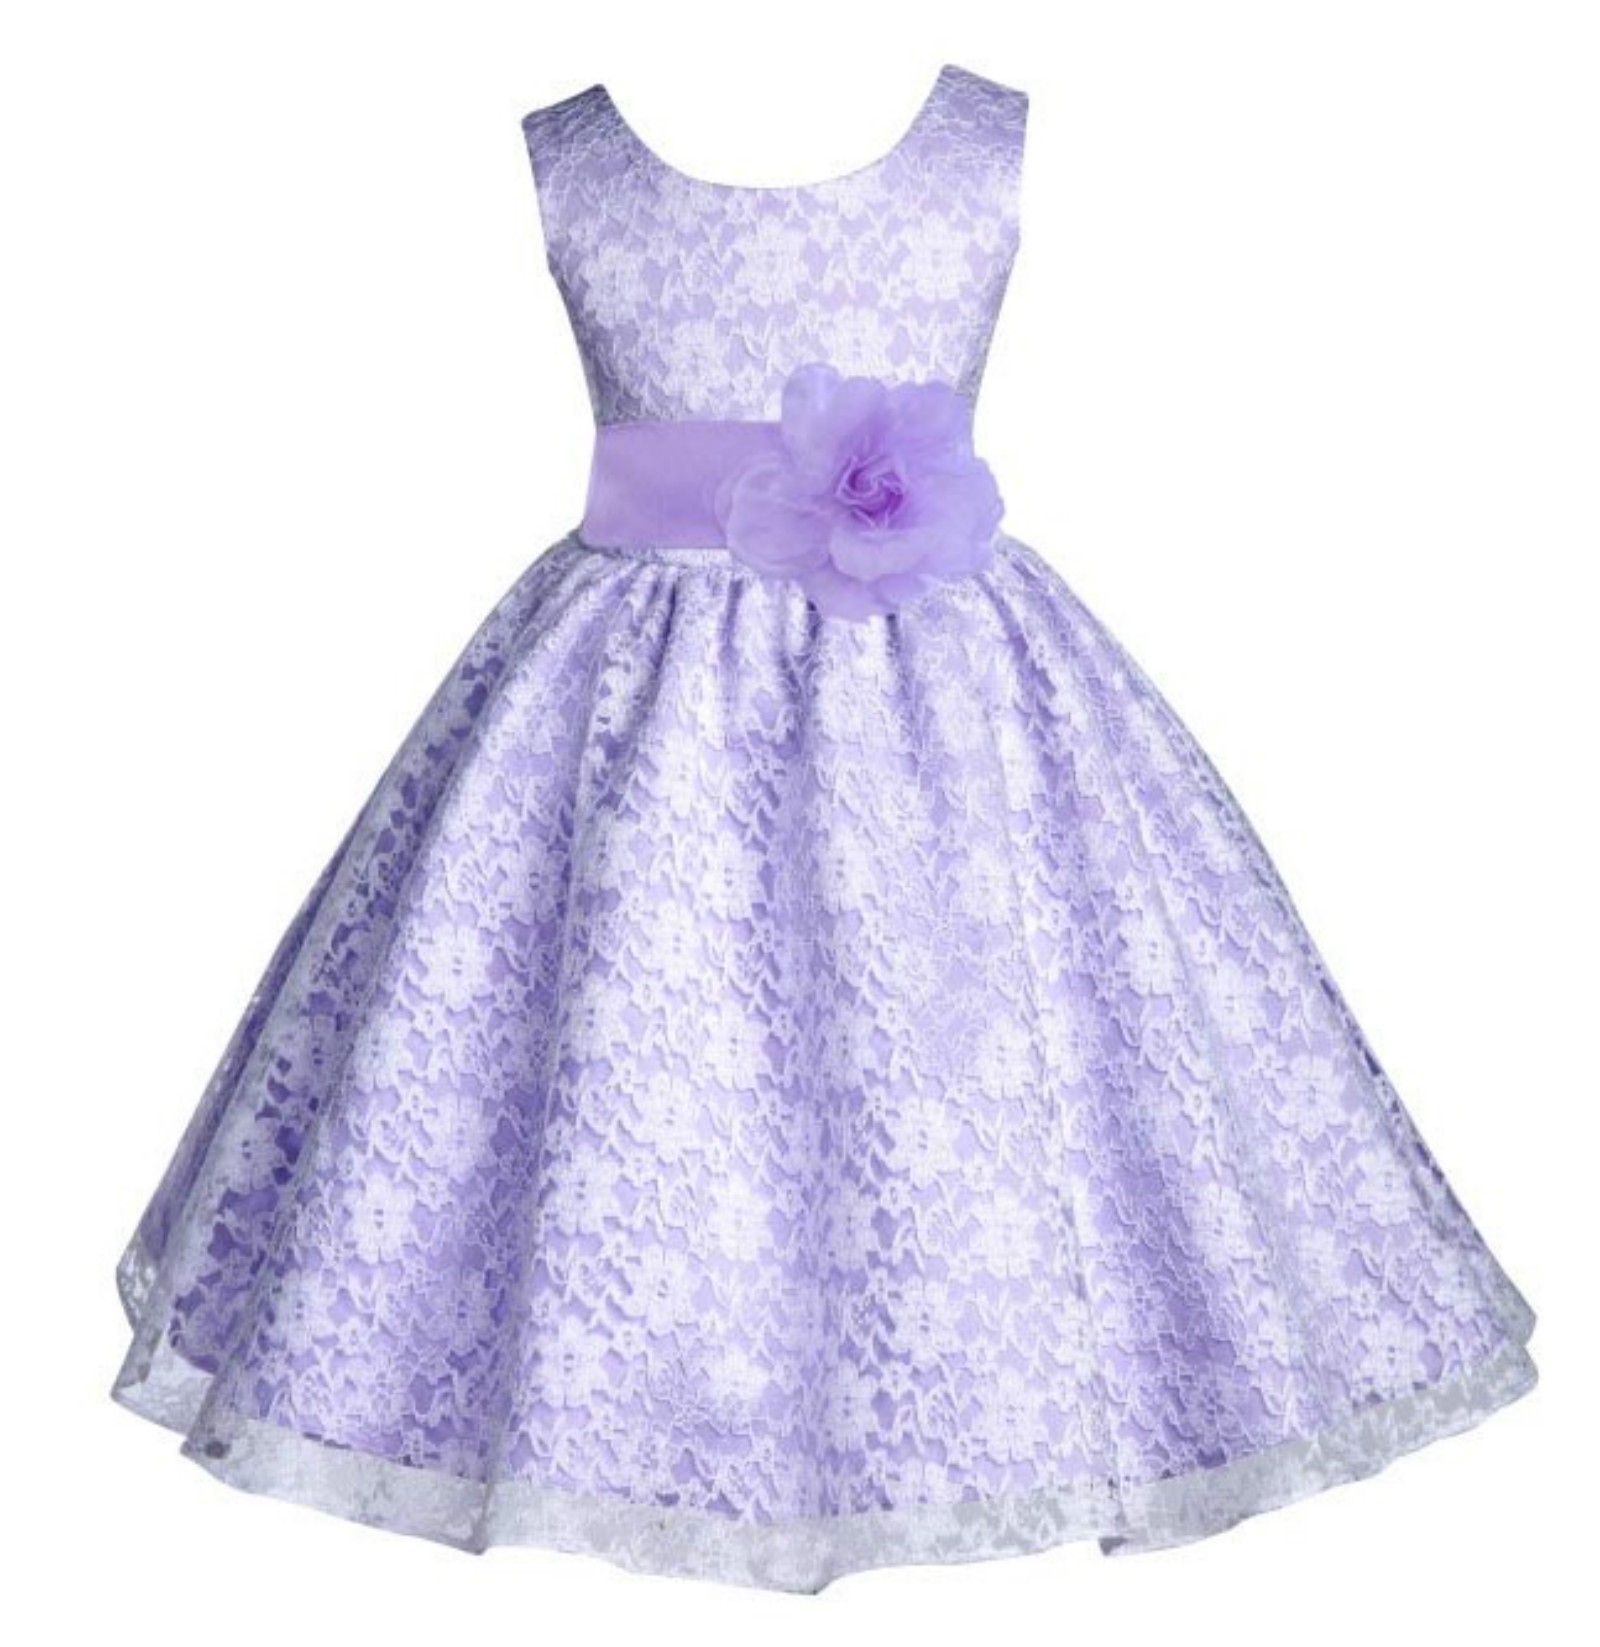 White/Lilac Floral Lace Overlay Flower Girl Dress Formal Beauty 163S